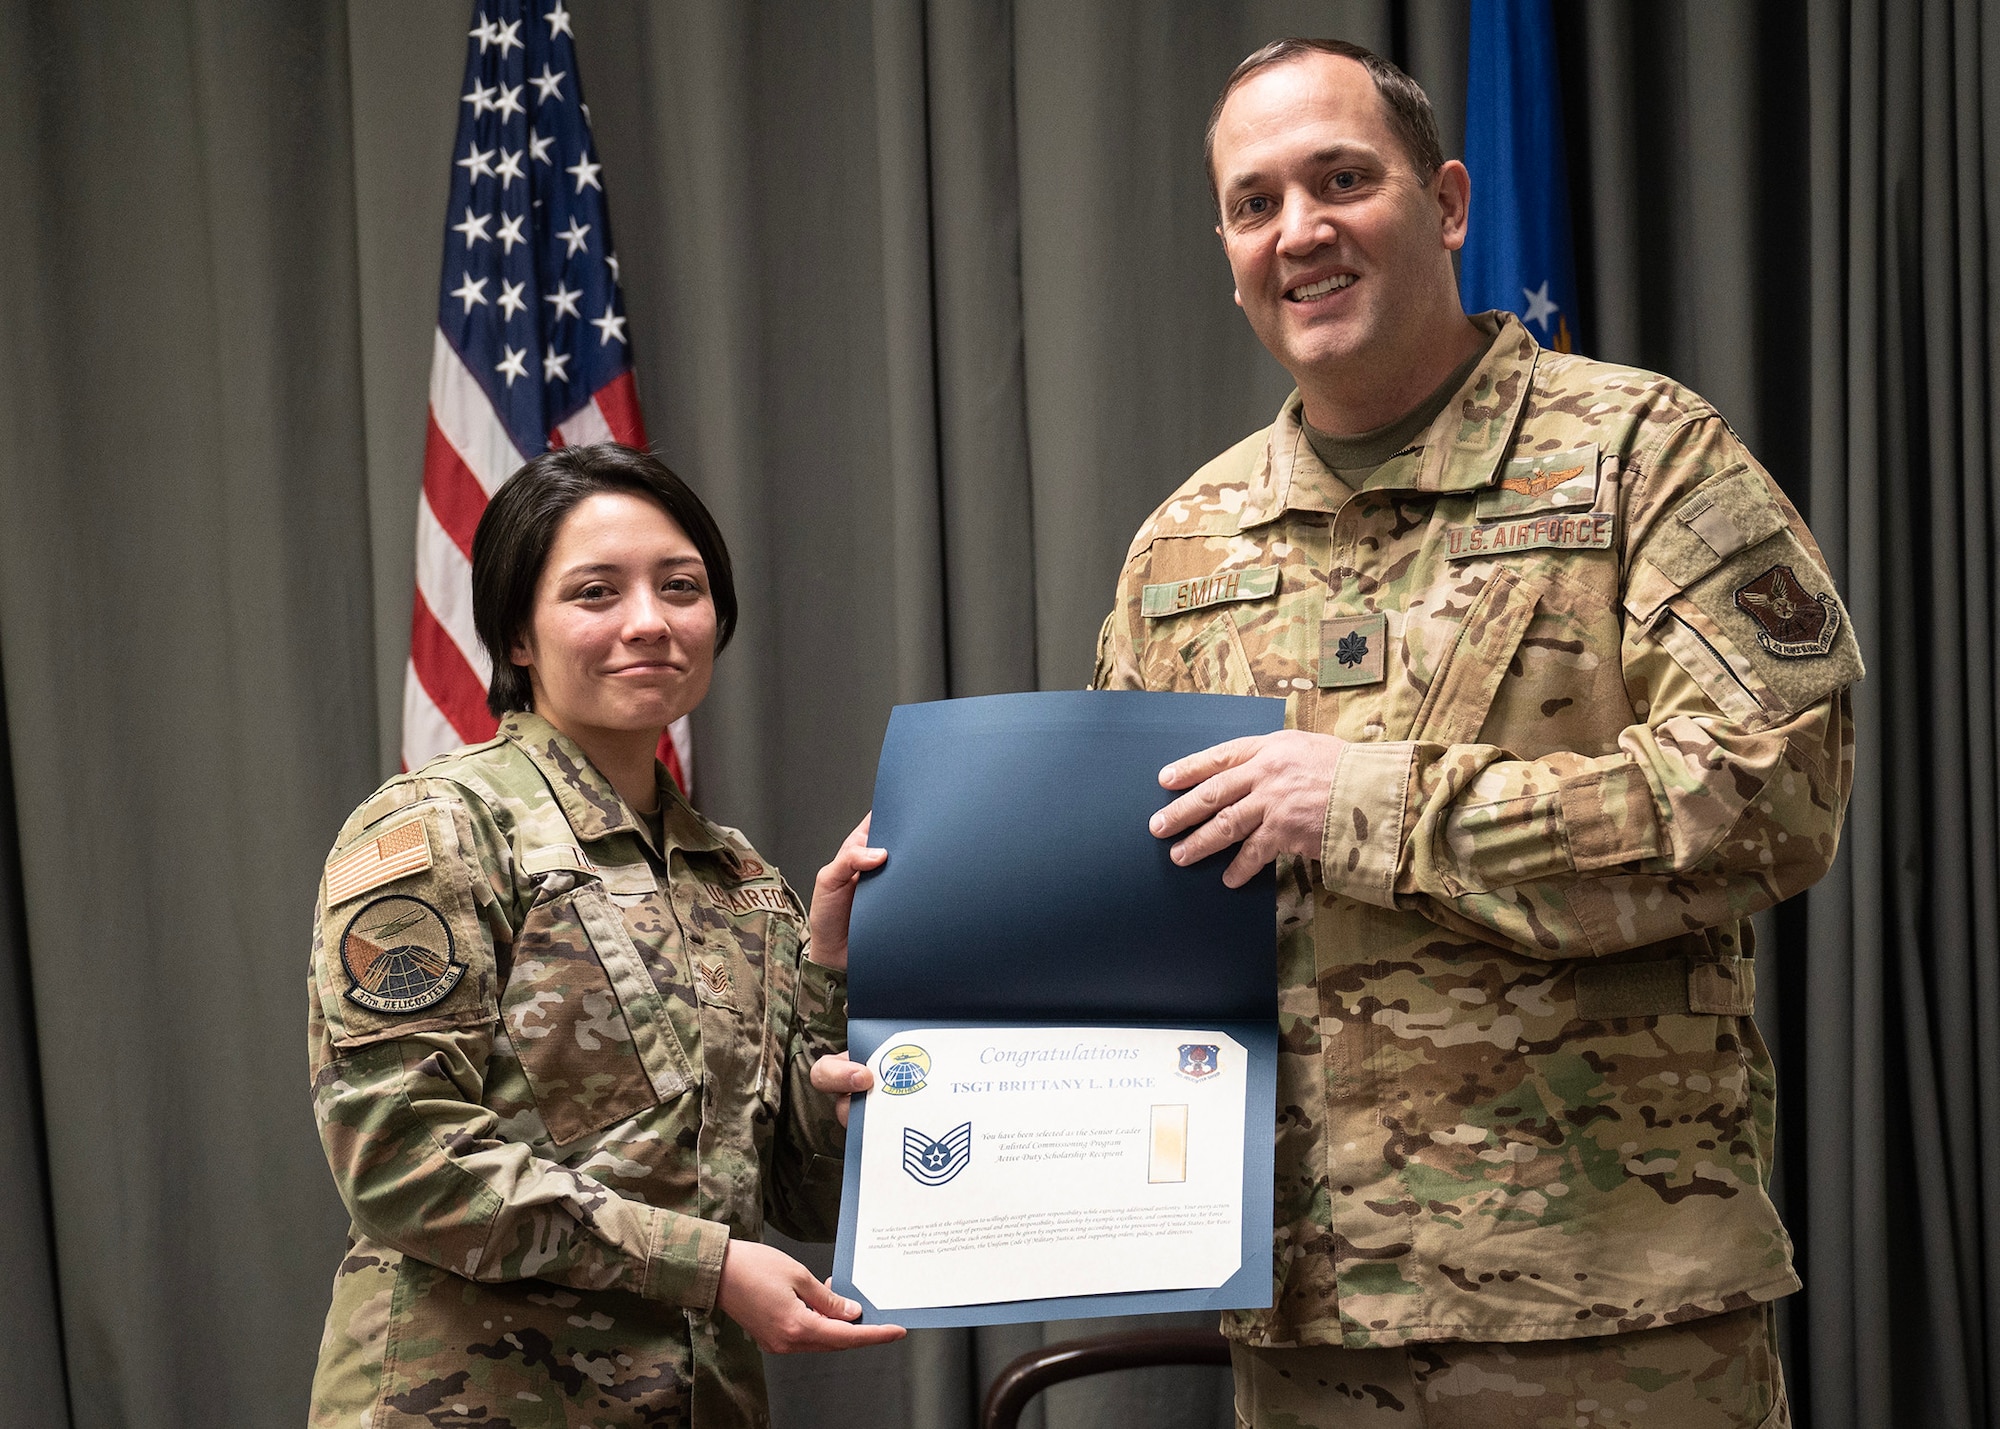 Airman receiving certificate from officer